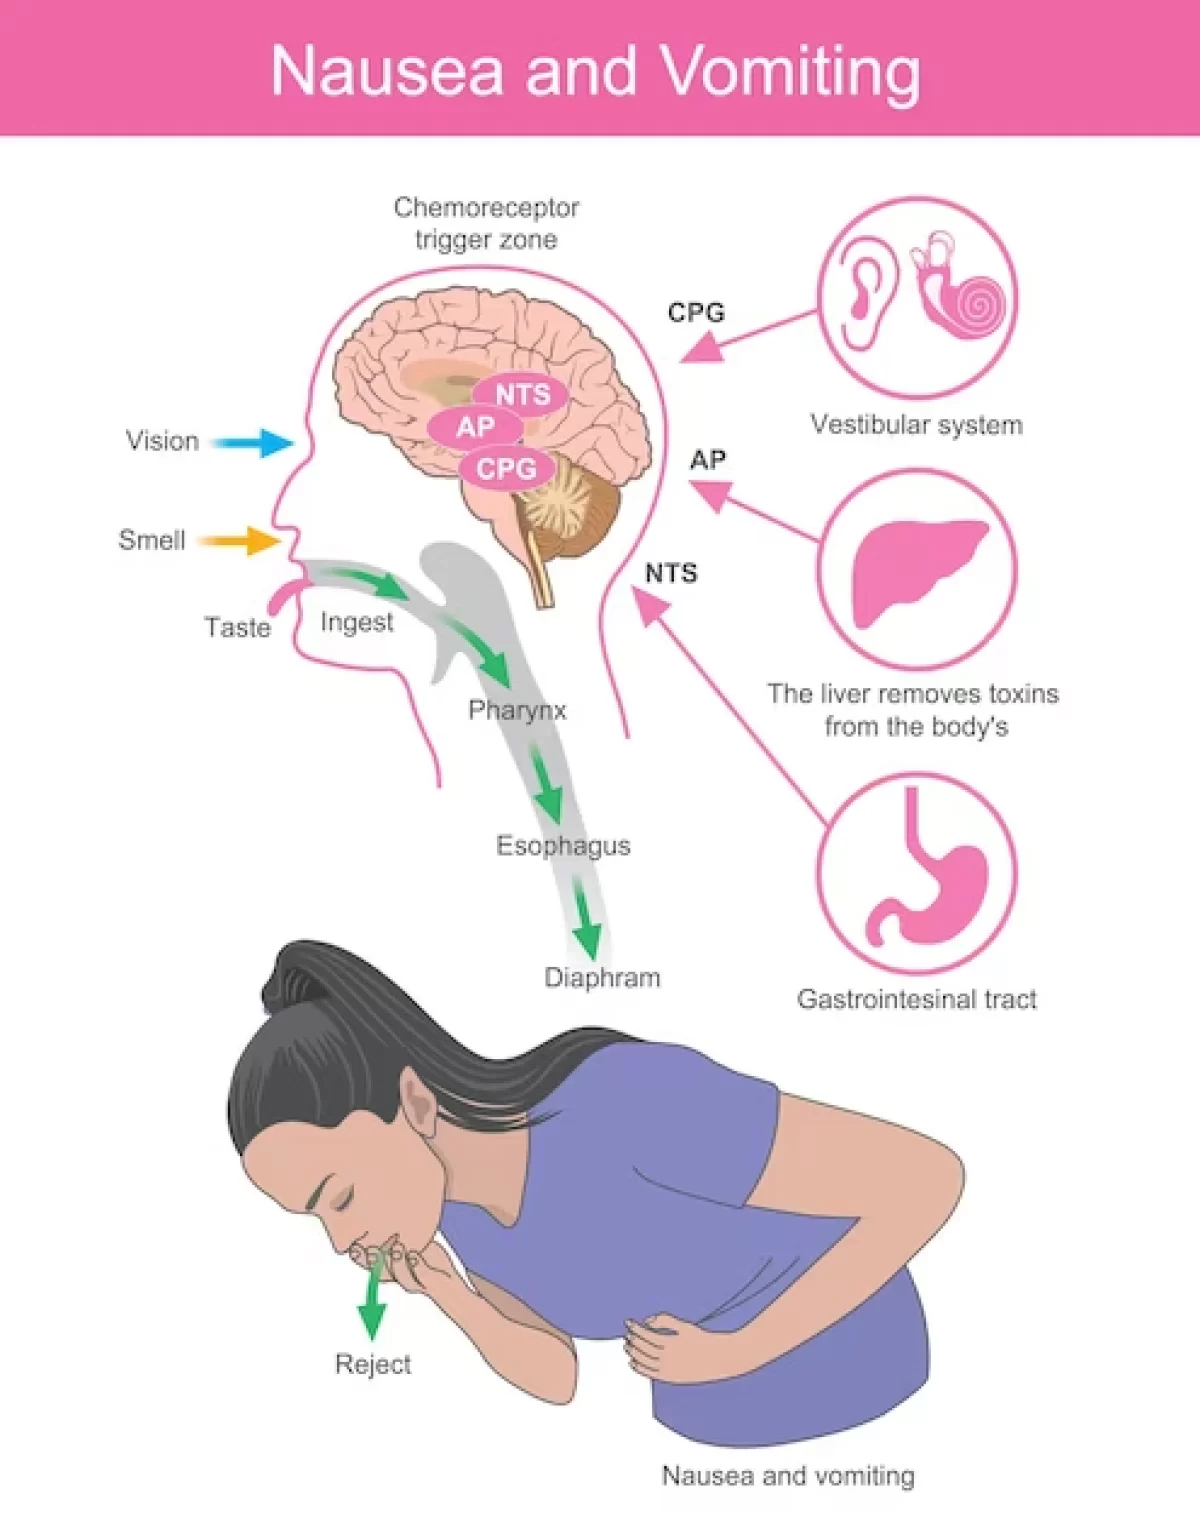 Categories of chronic nausea and vomiting with some specific causes